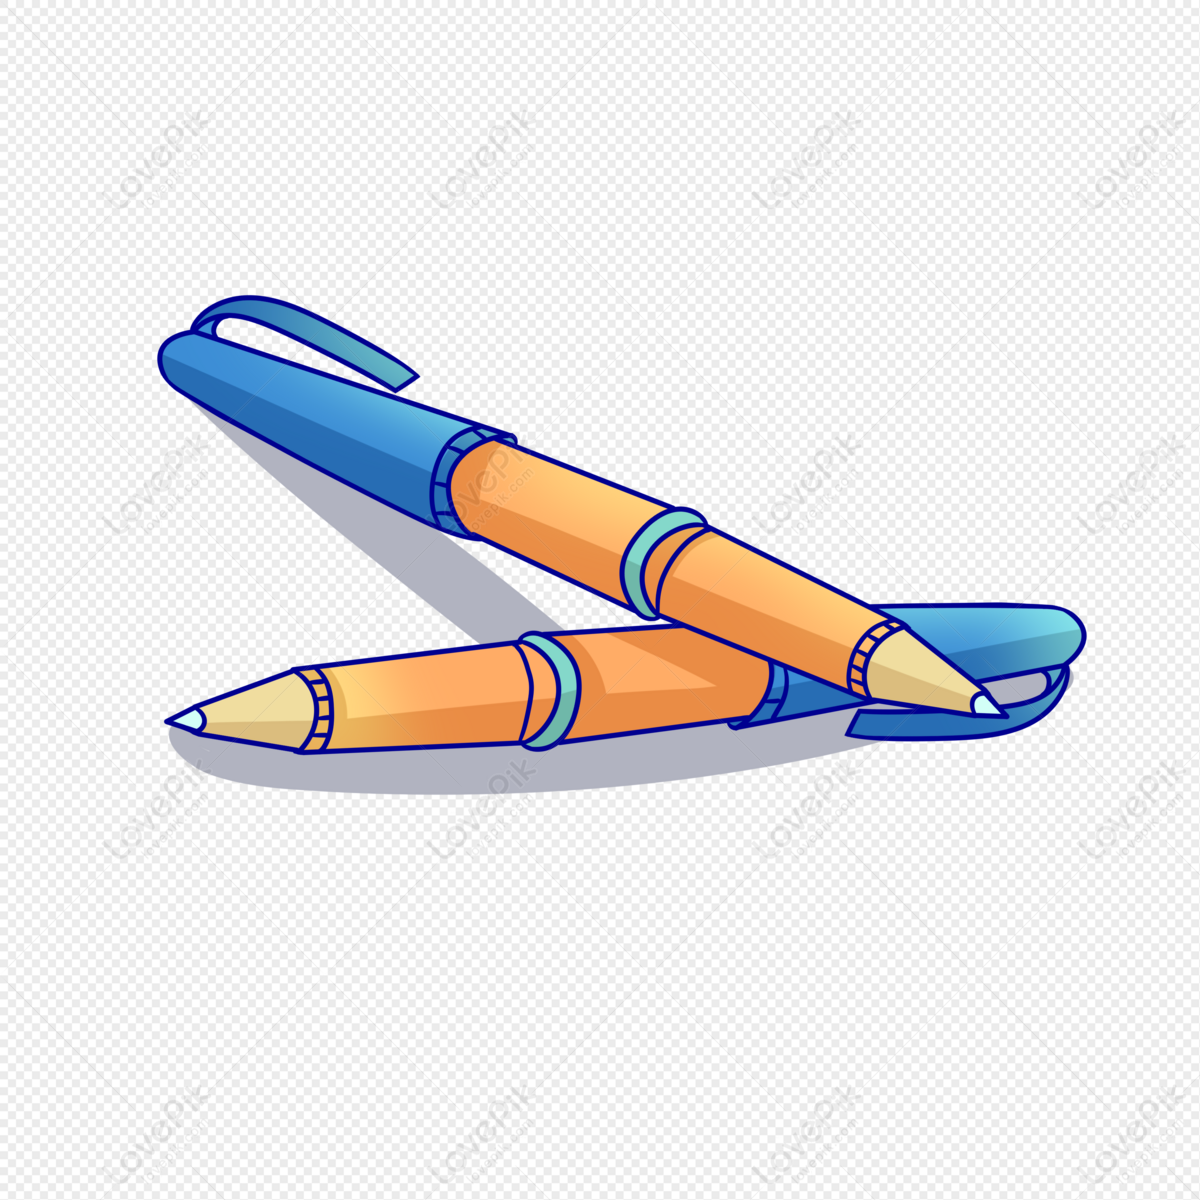 Pen PNG Free Download And Clipart Image For Free Download - Lovepik |  401173093